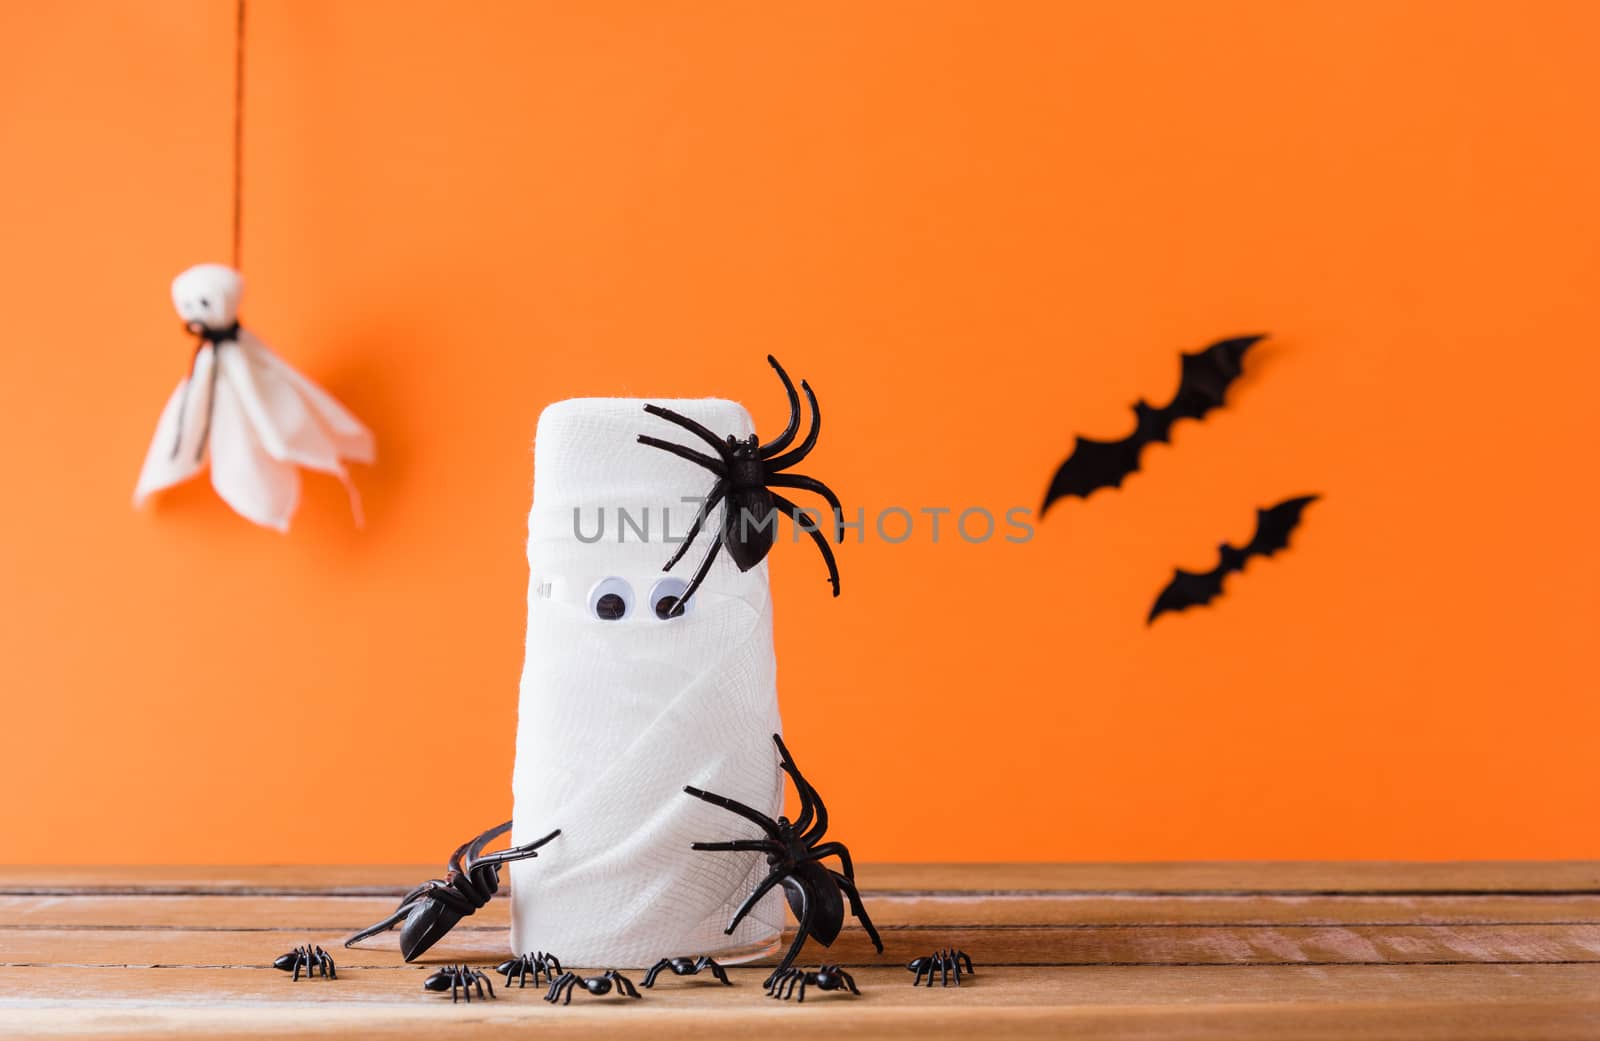 Funny Halloween day decor party concept, The mummy ghost on water glass wrapped around with bandage and have bats and spider stick it found only eyes, studio shot isolated on orange background